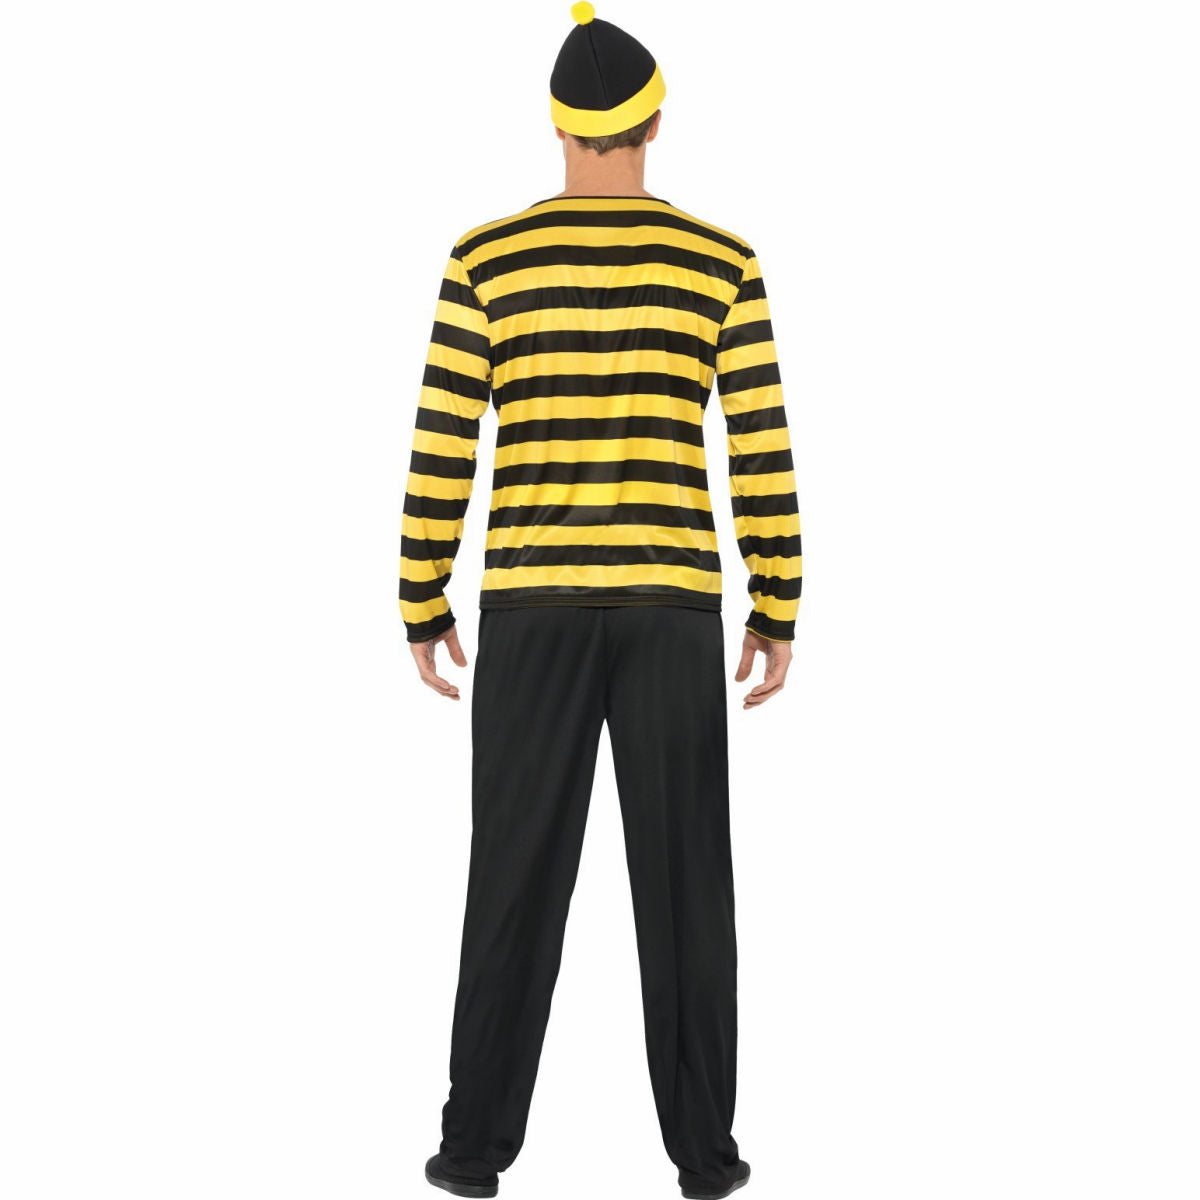 Where's Wally Odlaw Men's Costume with Pants, Top, Hat, Moustache and Glasses